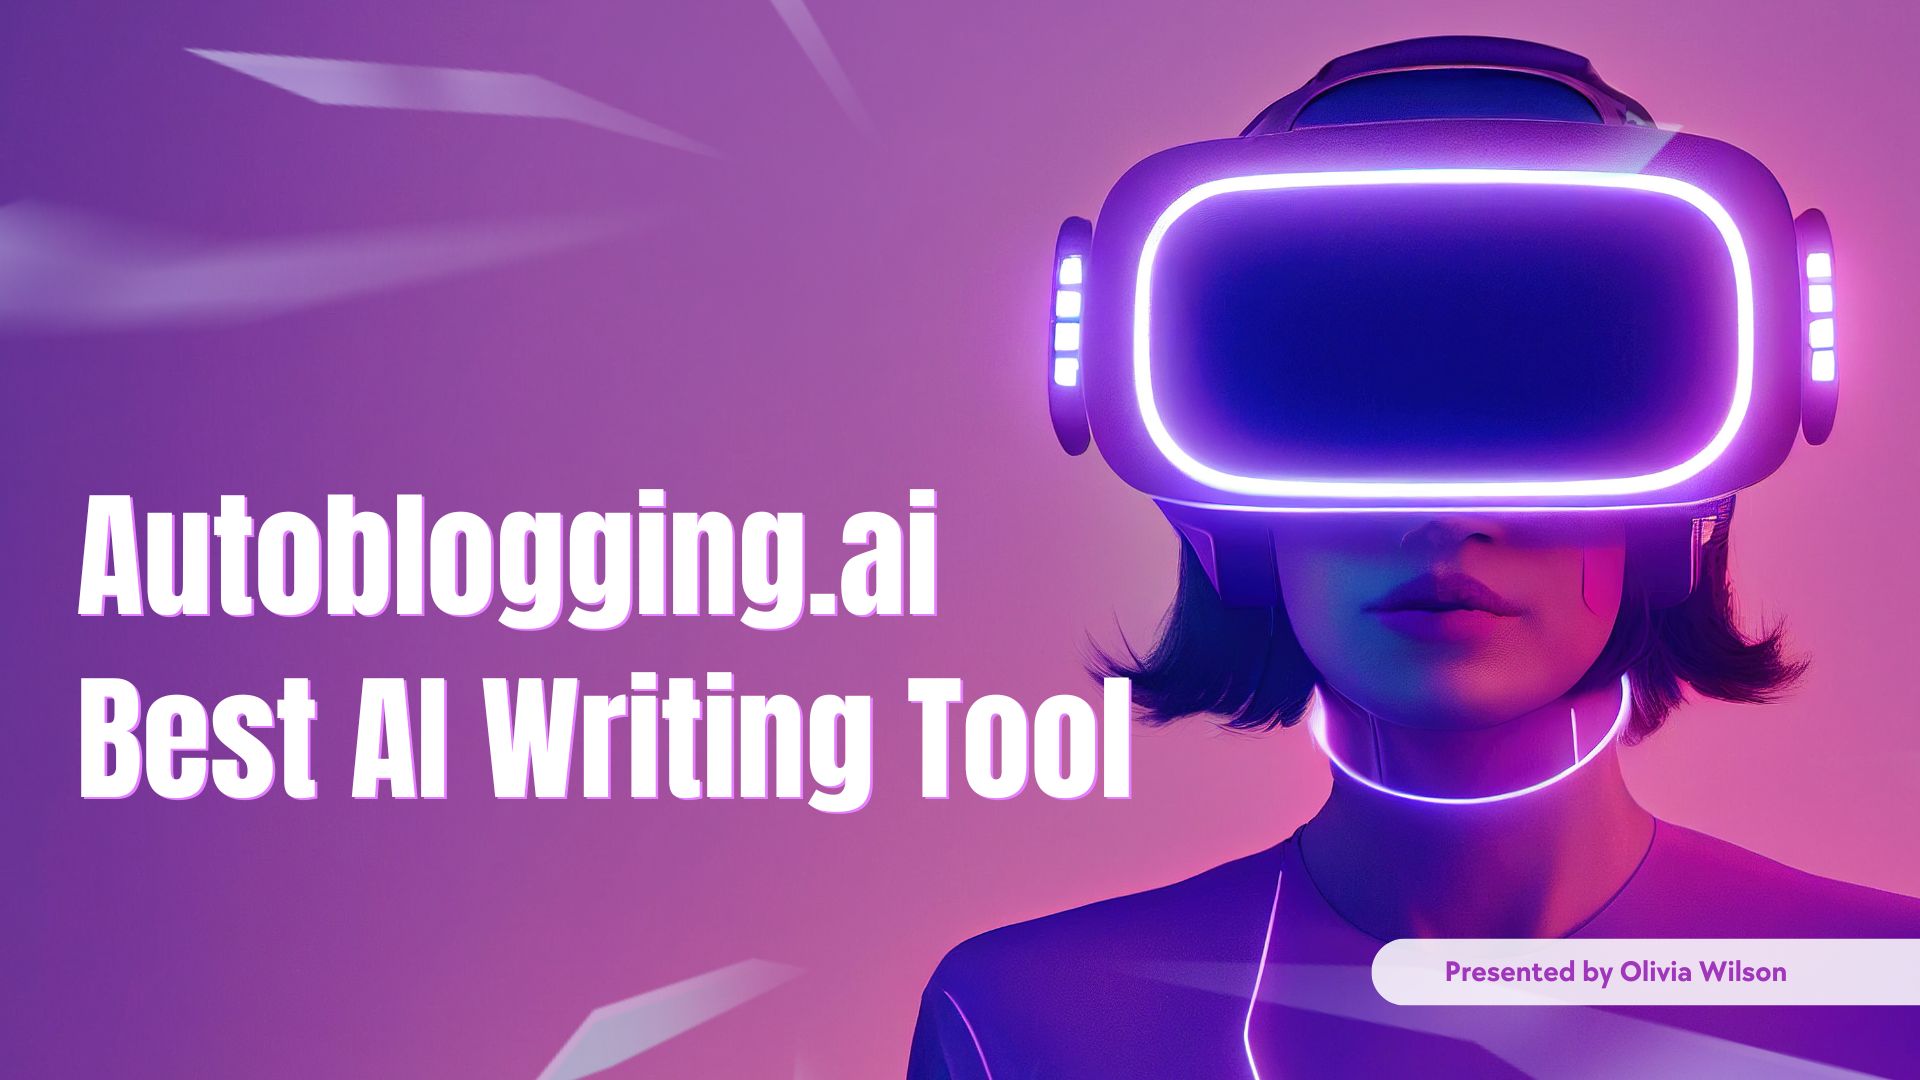 Why is Autoblogging.ai the Best AI Writing Tool